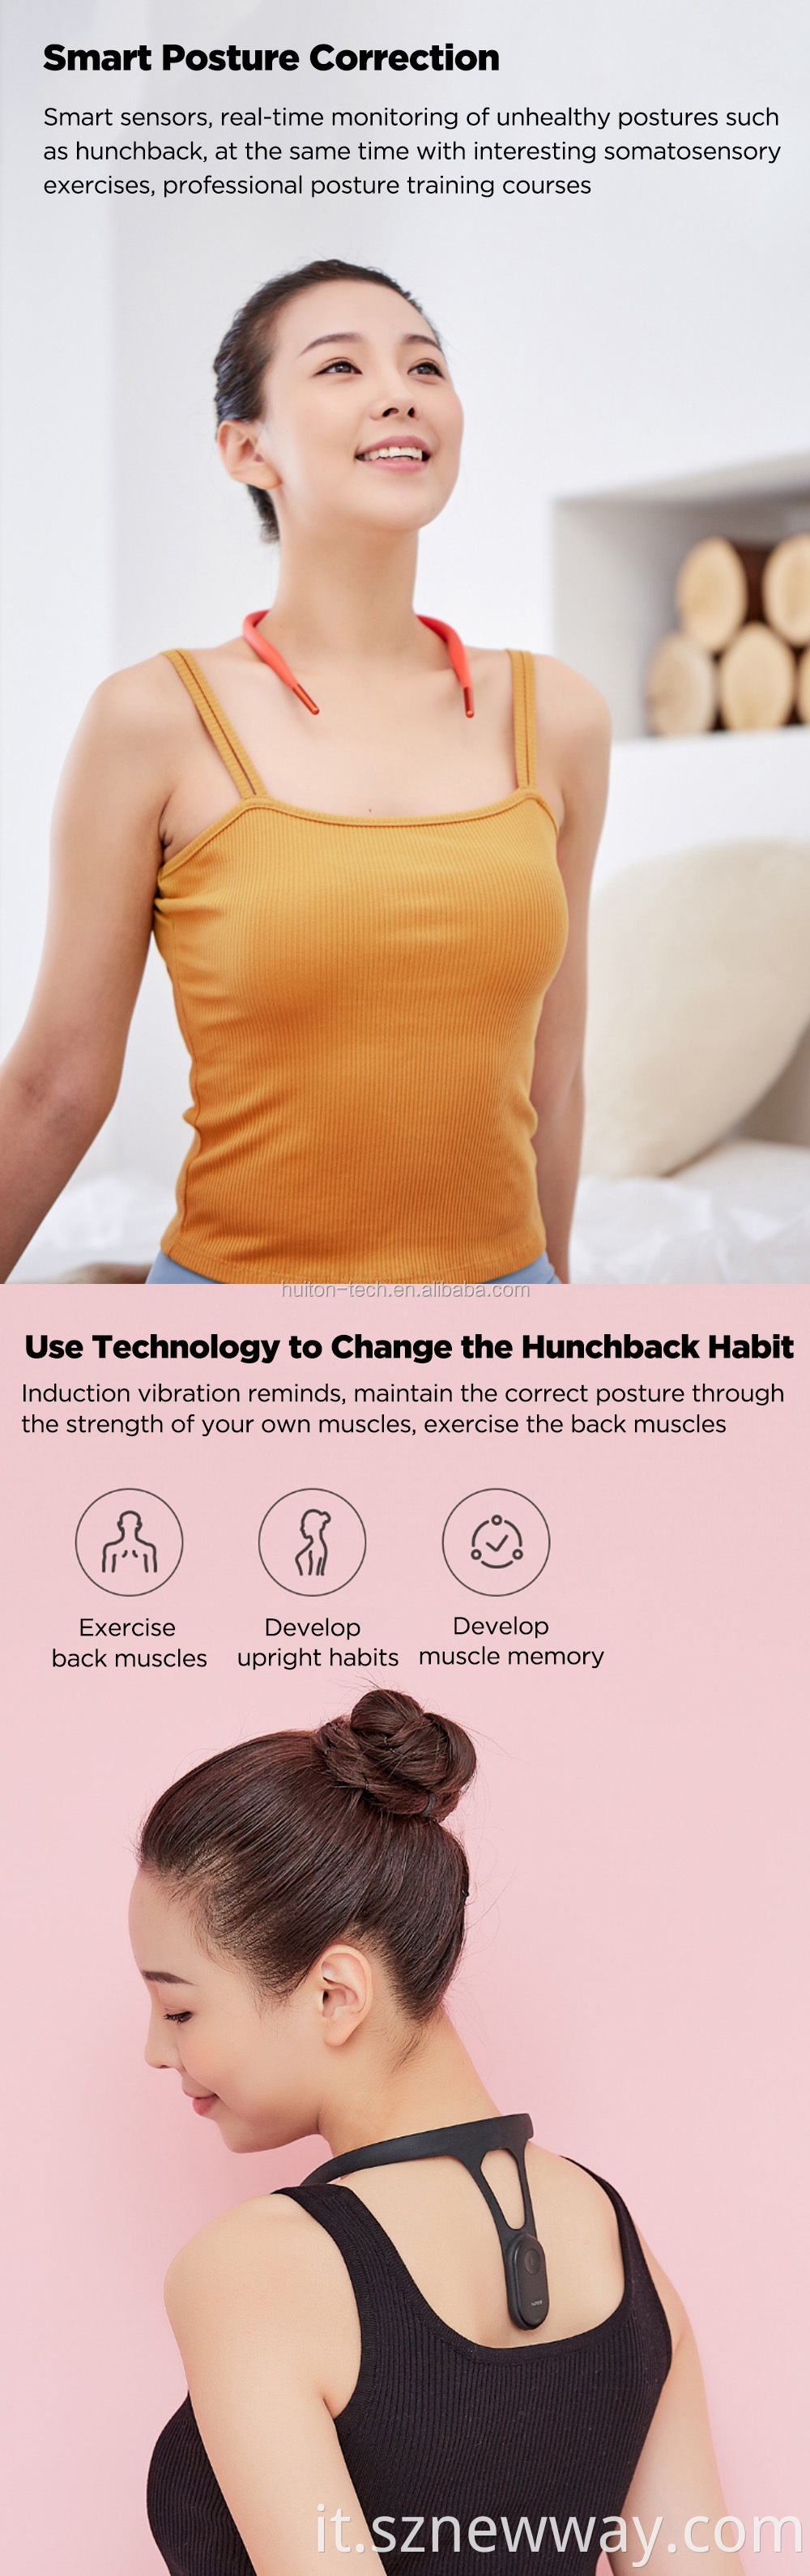 Hipee Posture Device For Adult